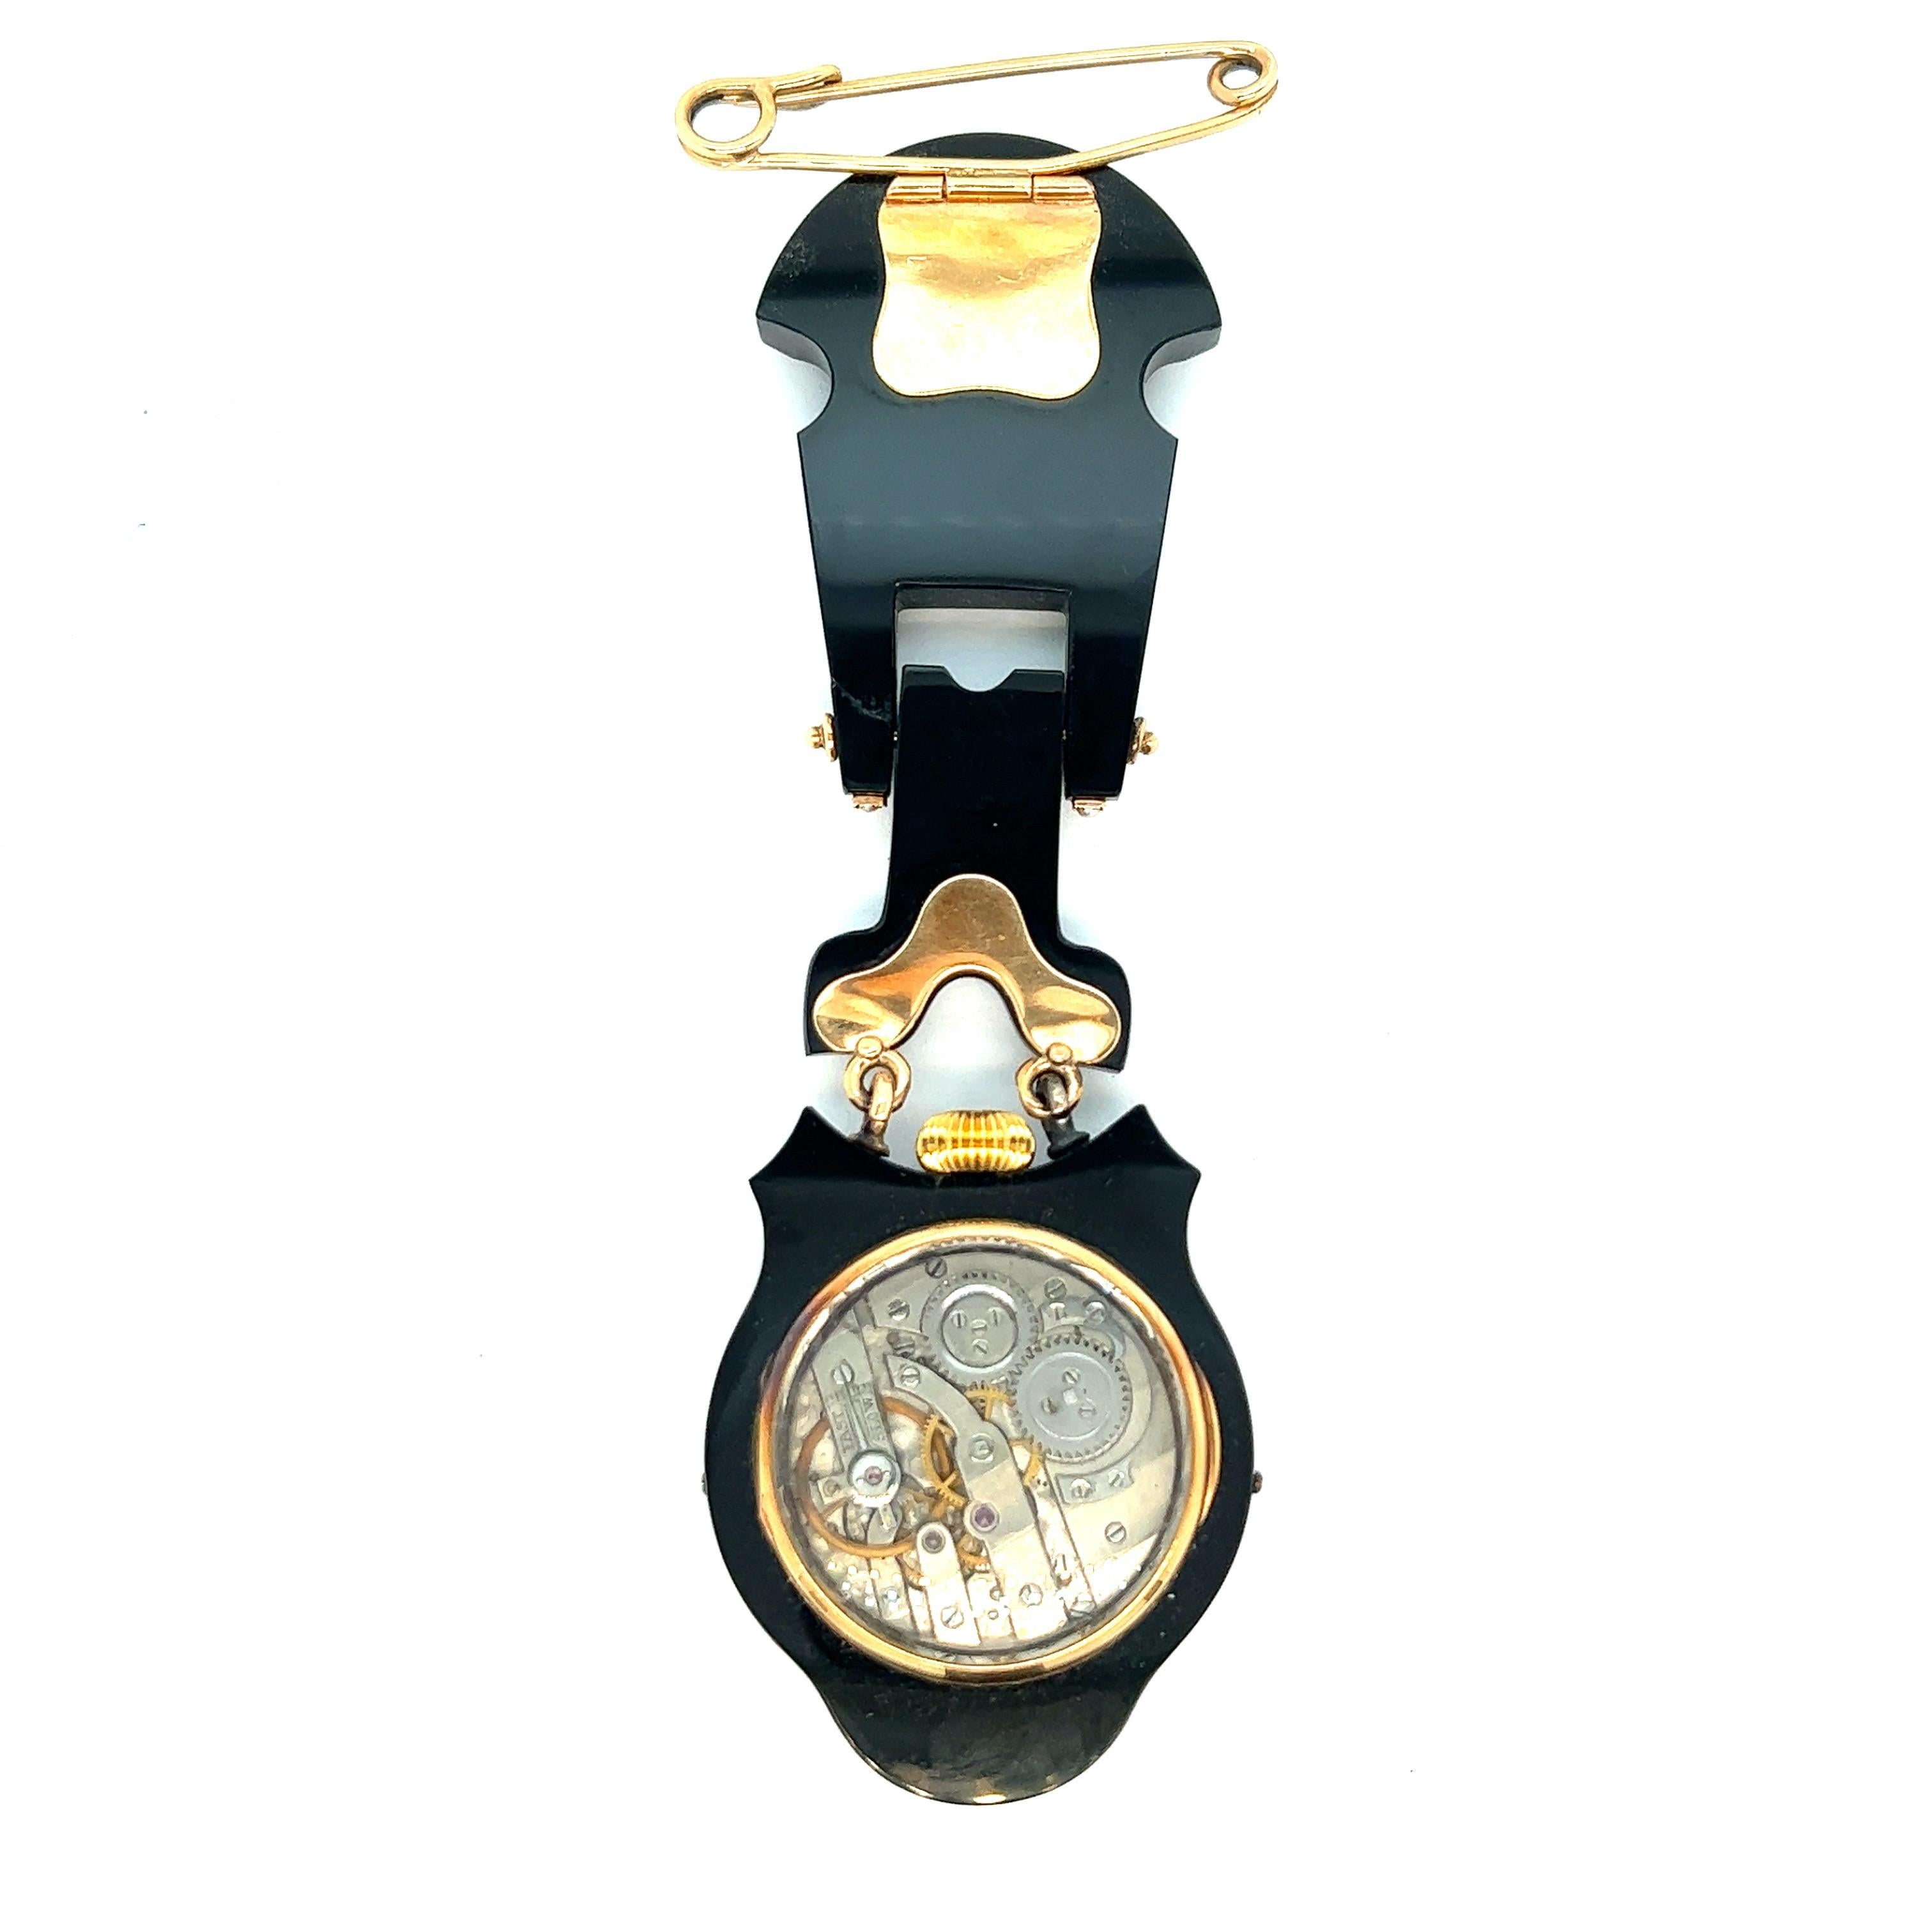 Black onyx with pearls lapel mourning watch

18k yellow gold bezel and hinges; bezel and accent trim work set with seed pearls; overall size 1.44 inches width, 4.56 inches length; total weight 63.2 grams

Comes in a Tiffany & Co. fitted custom box;